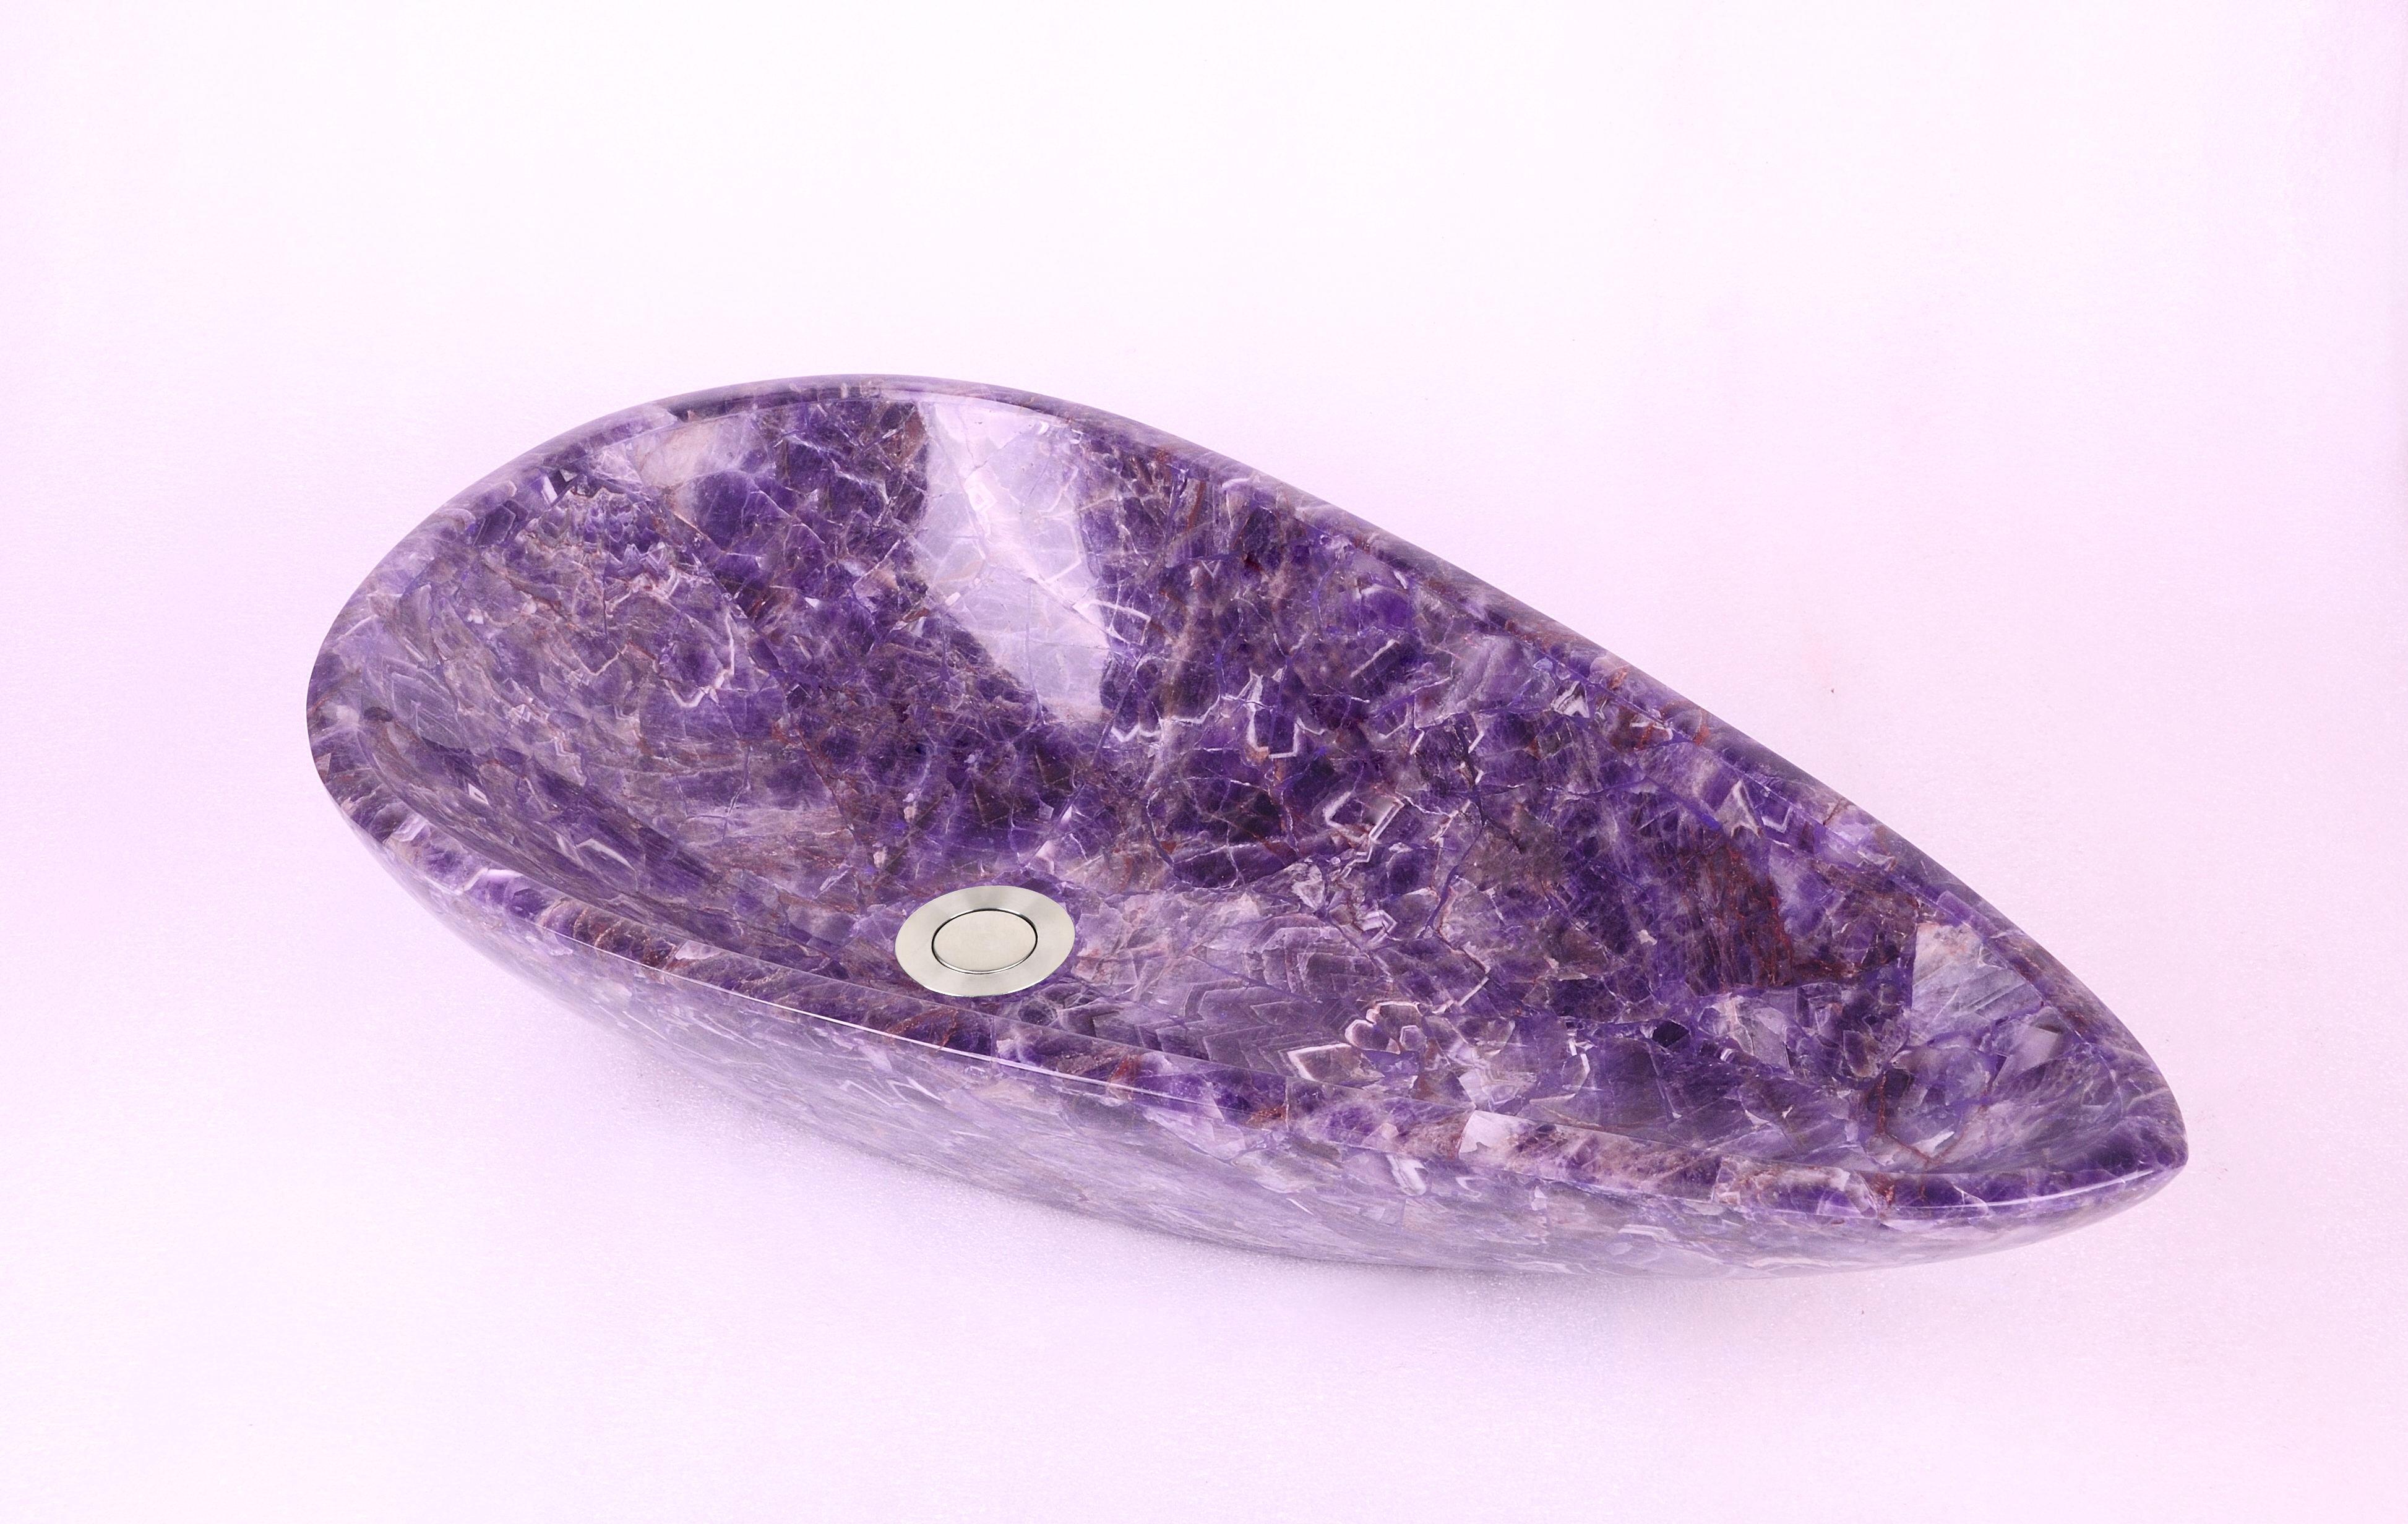 Amethyst wash basin by ARTISS
Dimensions:L 65 x W 34 x H 16.5 cm
Materials: Rock crystal

ARTIS is named from artist, whose two -S